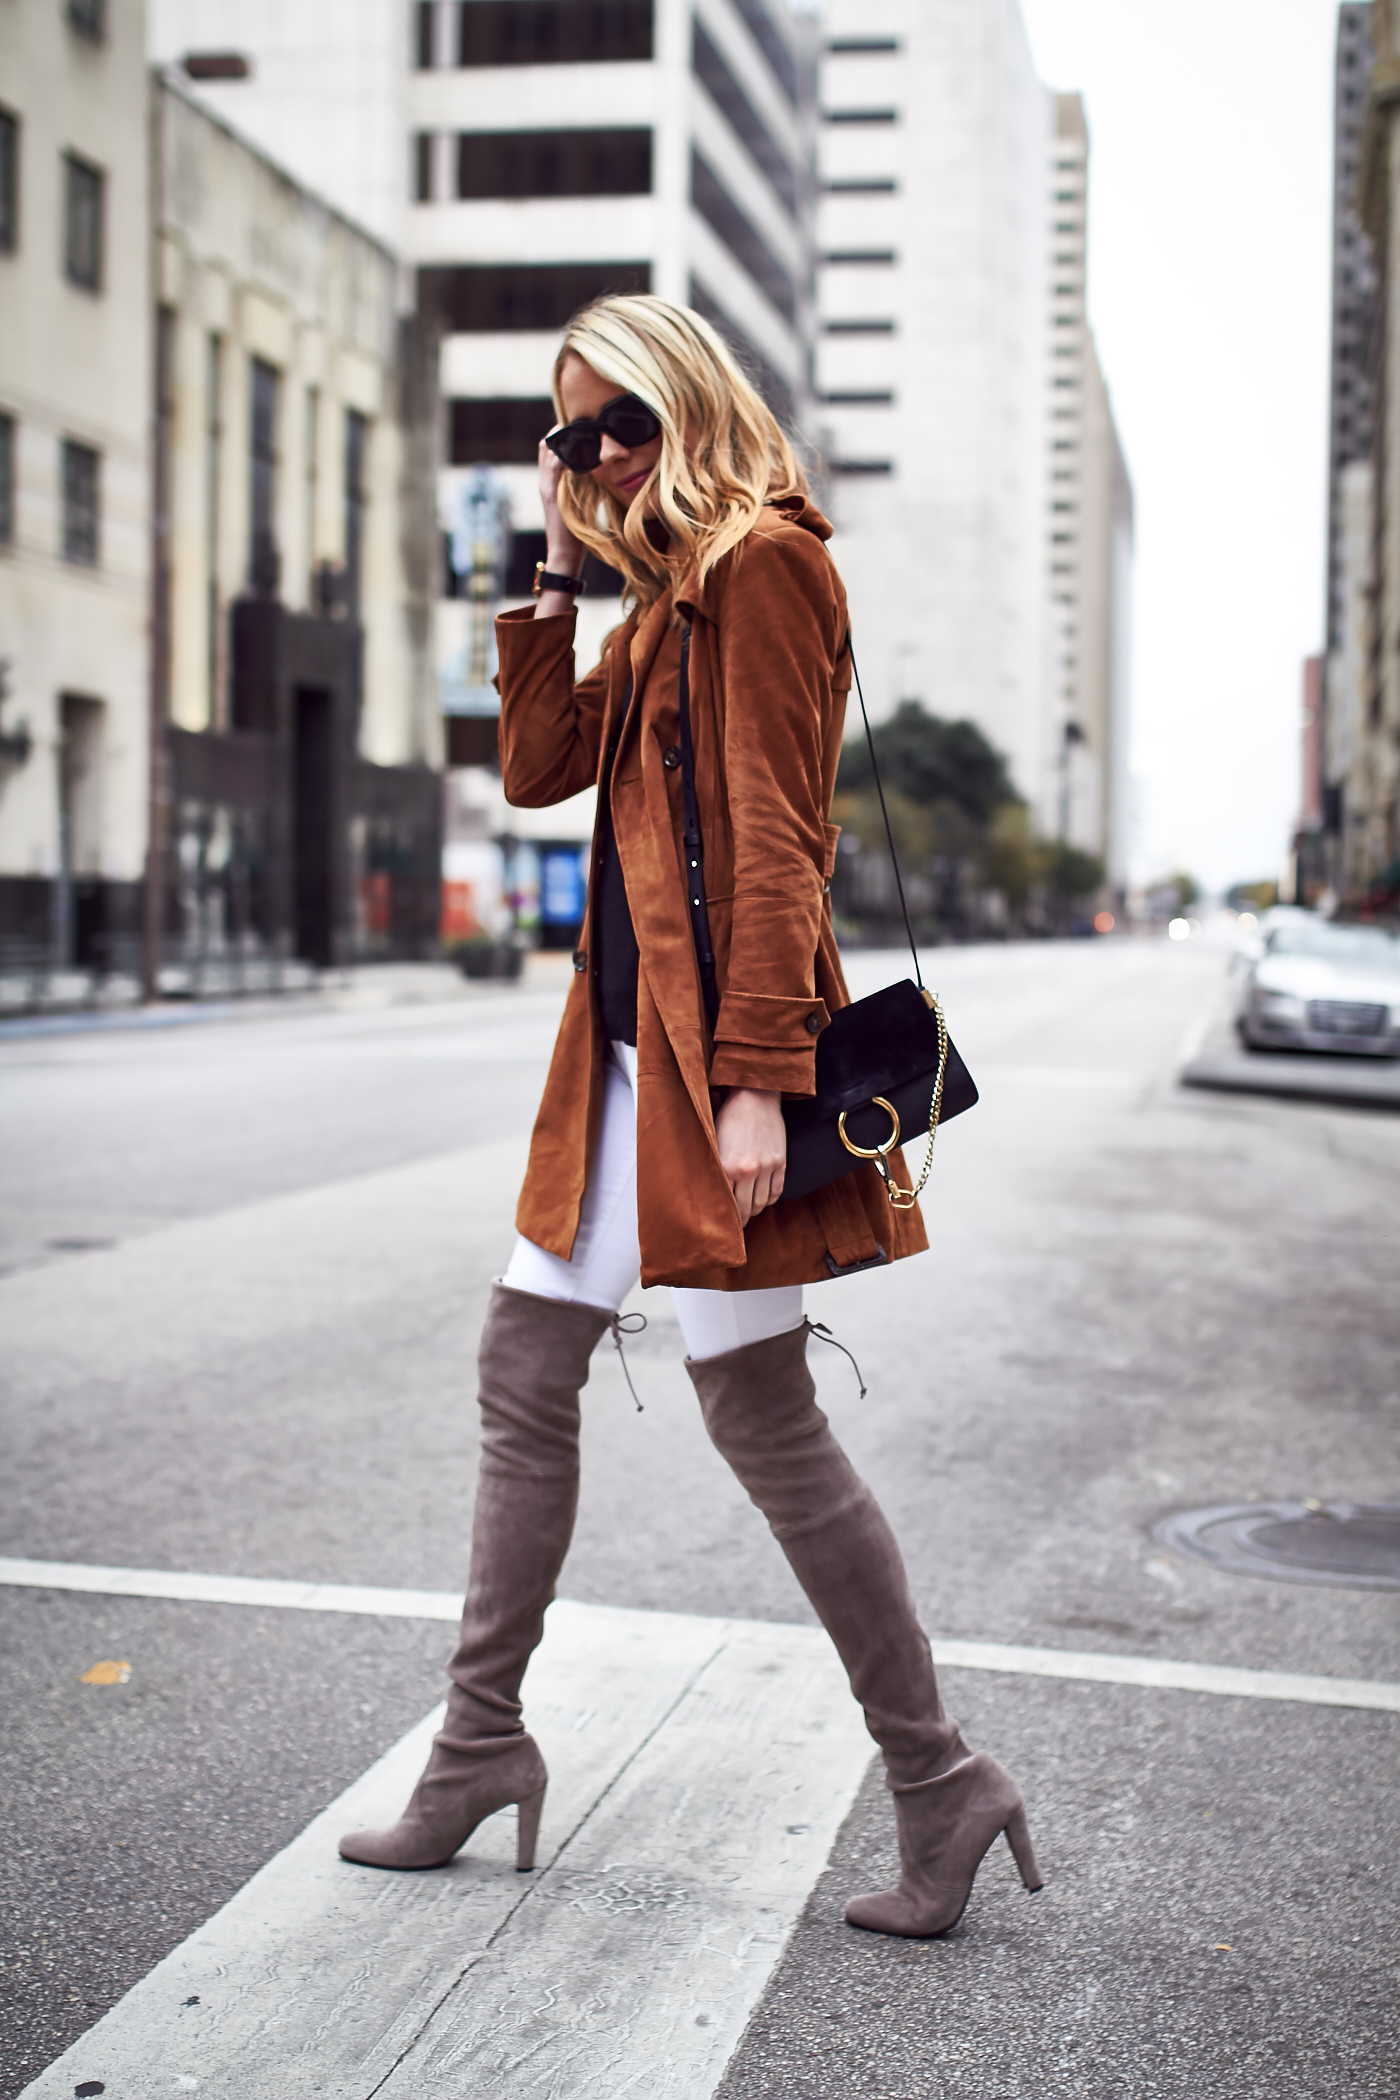 Fall Outfit, Tan Suede Trench Coat, Chloe Faye Handbag, Stuart Weitzman Highland Over-the-Knee Boots, White Skinny Jeans, Black Sweater